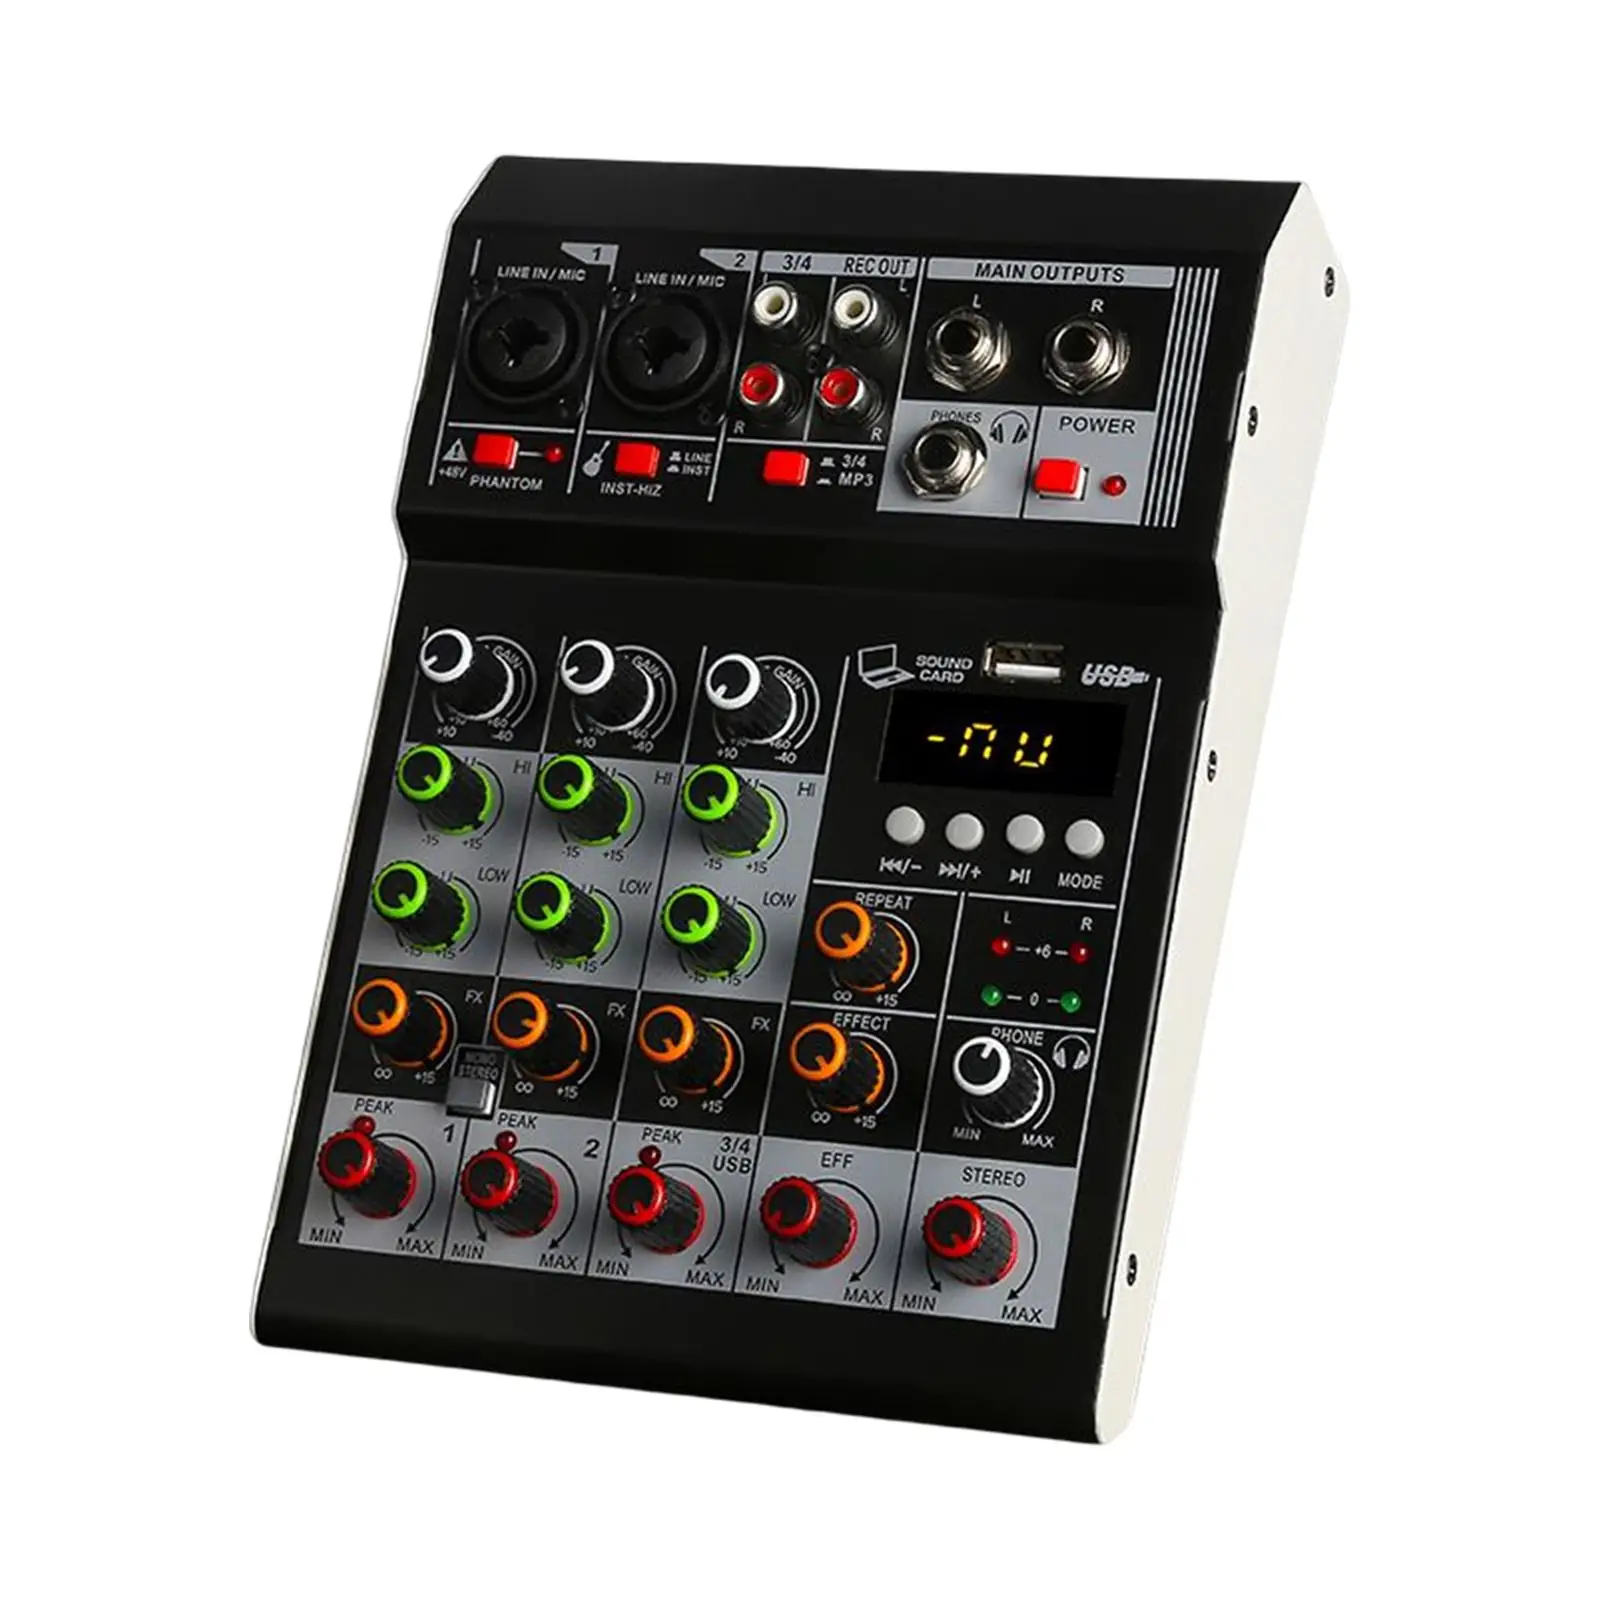 Professional 4 Channel Compact Studio Mixer Computer Recording Input Instant Listening for Broadcast Home Studio Recording Bands